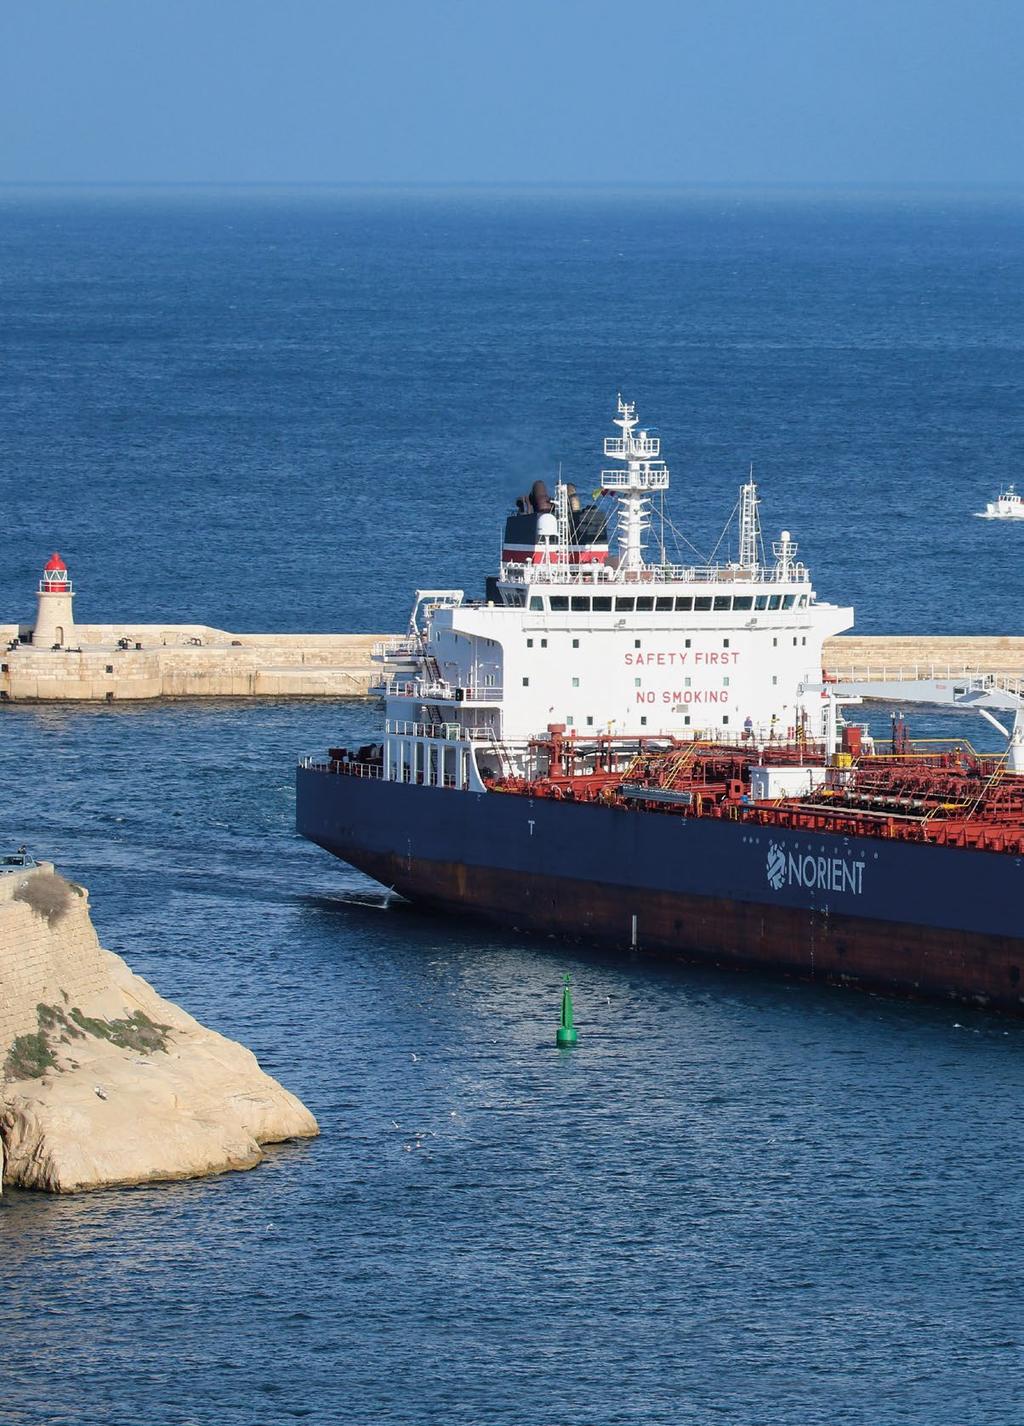 22 MANAGEMENT COMMENTARY / TANKERS Tankers NORDEN took advantage of the reasonable rates at the beginning of the year to take coverage against a gradually deteriorating tanker market.